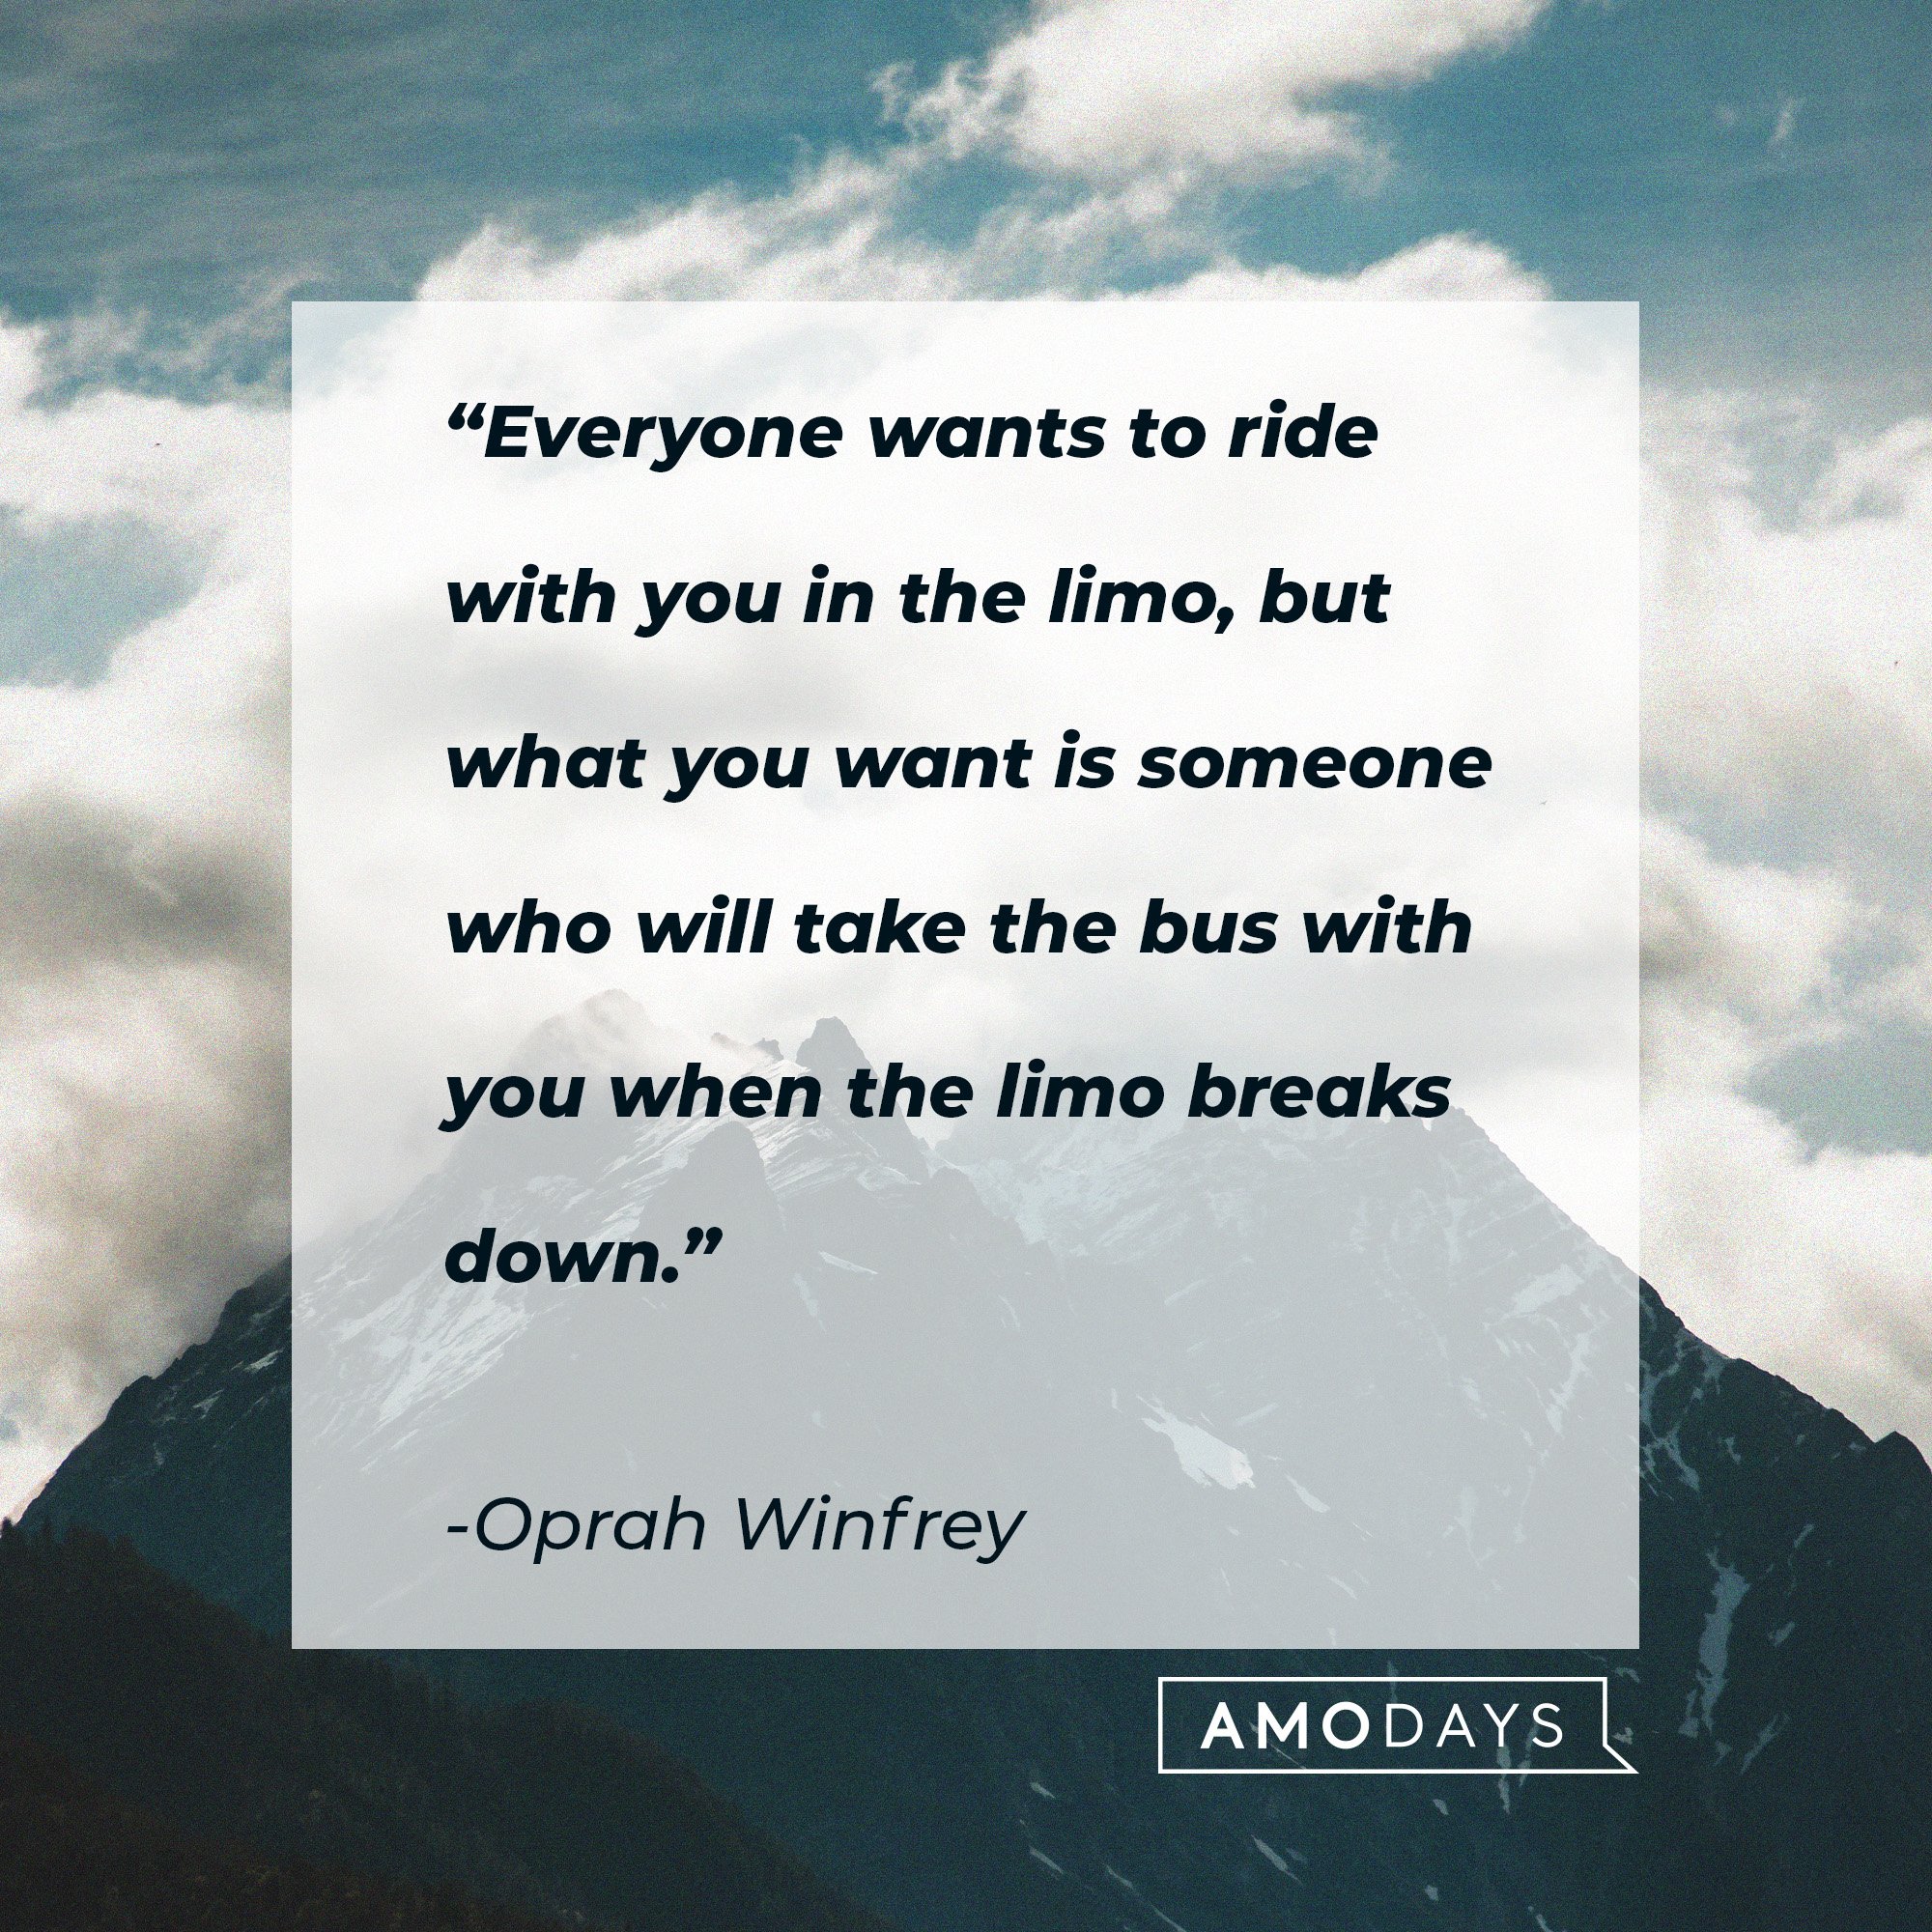 Oprah Winfrey's quote: “Everyone wants to ride with you in the limo, but what you want is someone who will take the bus with you when the limo breaks down.” | Image: Amodays